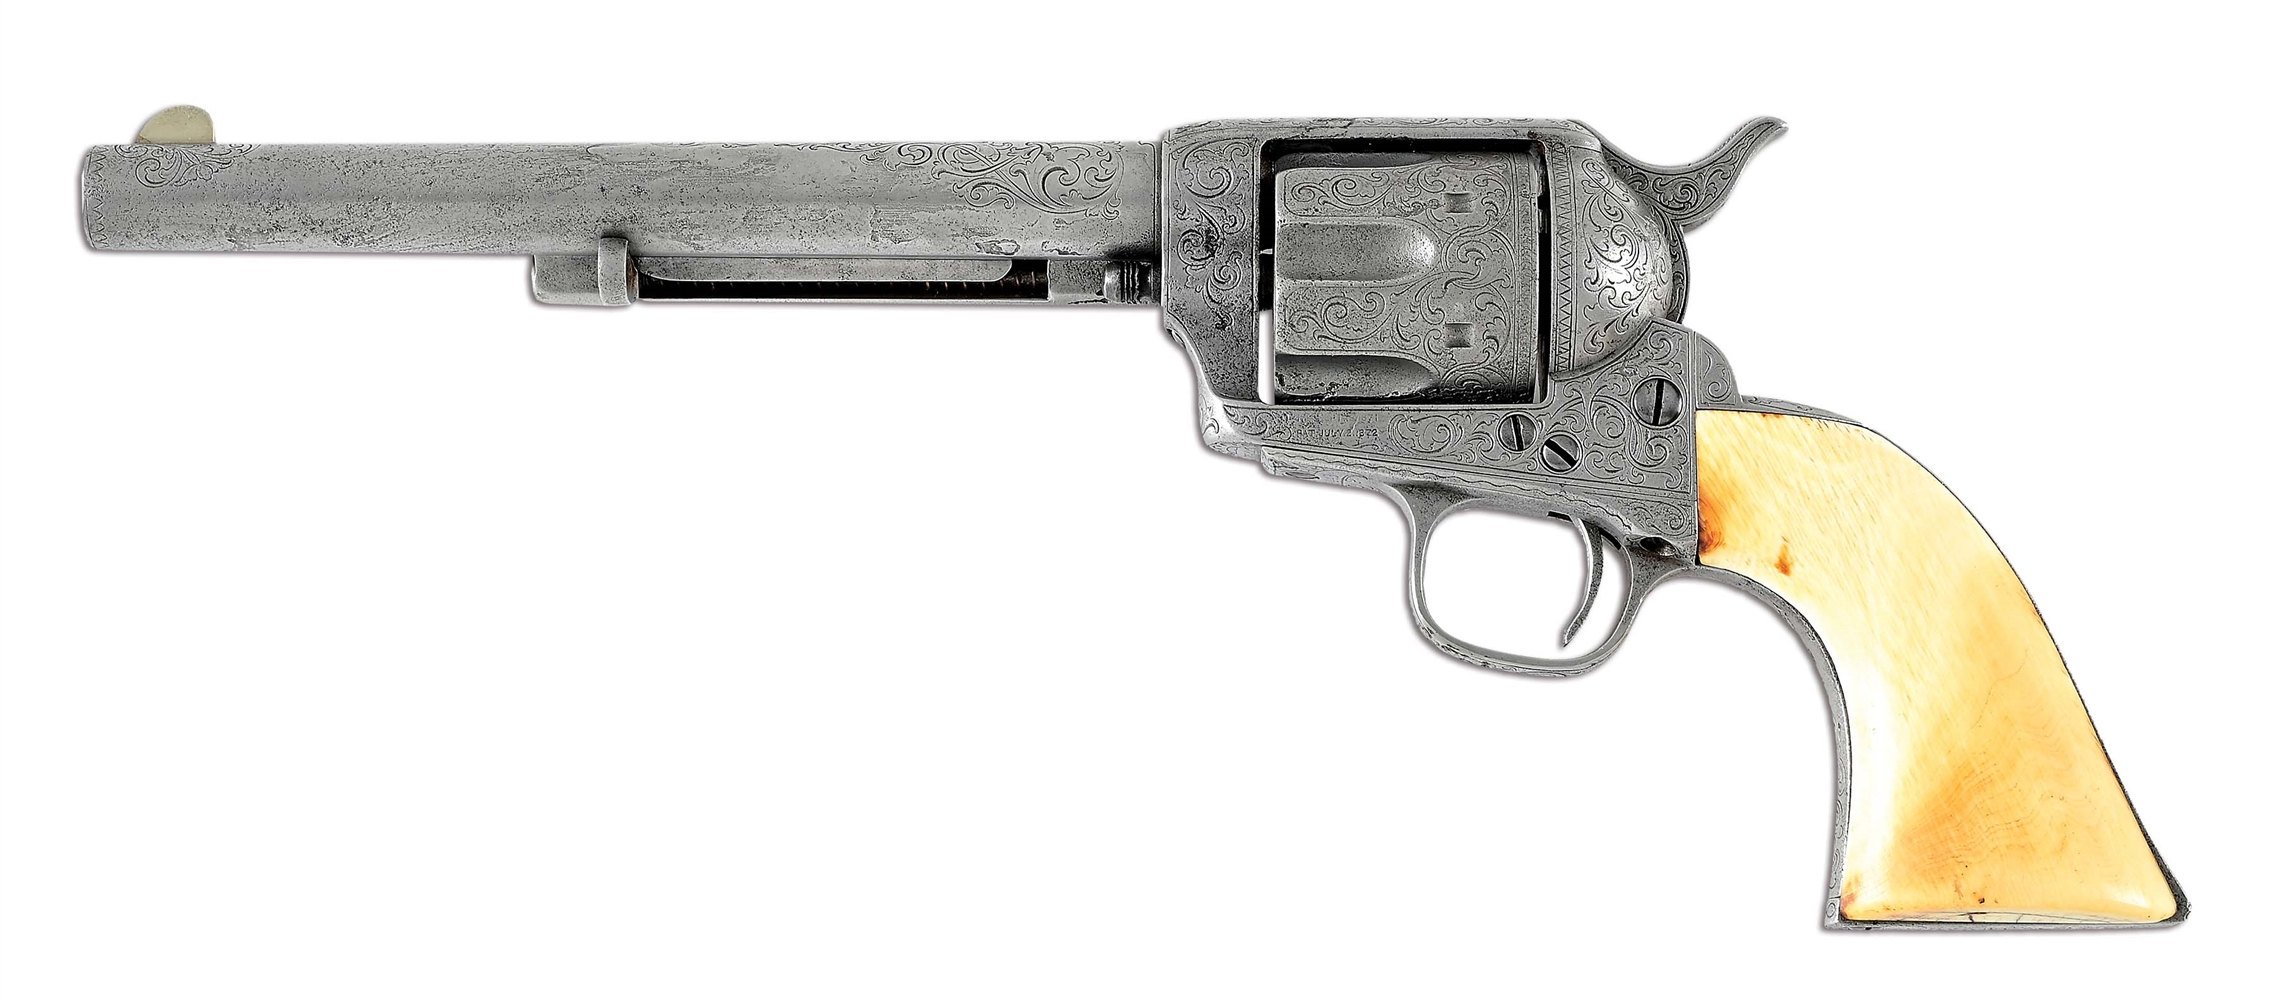 (A) RARE, NEWLY DISCOVERED, FACTORY ENGRAVED COLT SINGLE ACTION REVOLVER FROM THE 1876 CENTENNIAL EXPOSITION WHEEL DISPLAY.